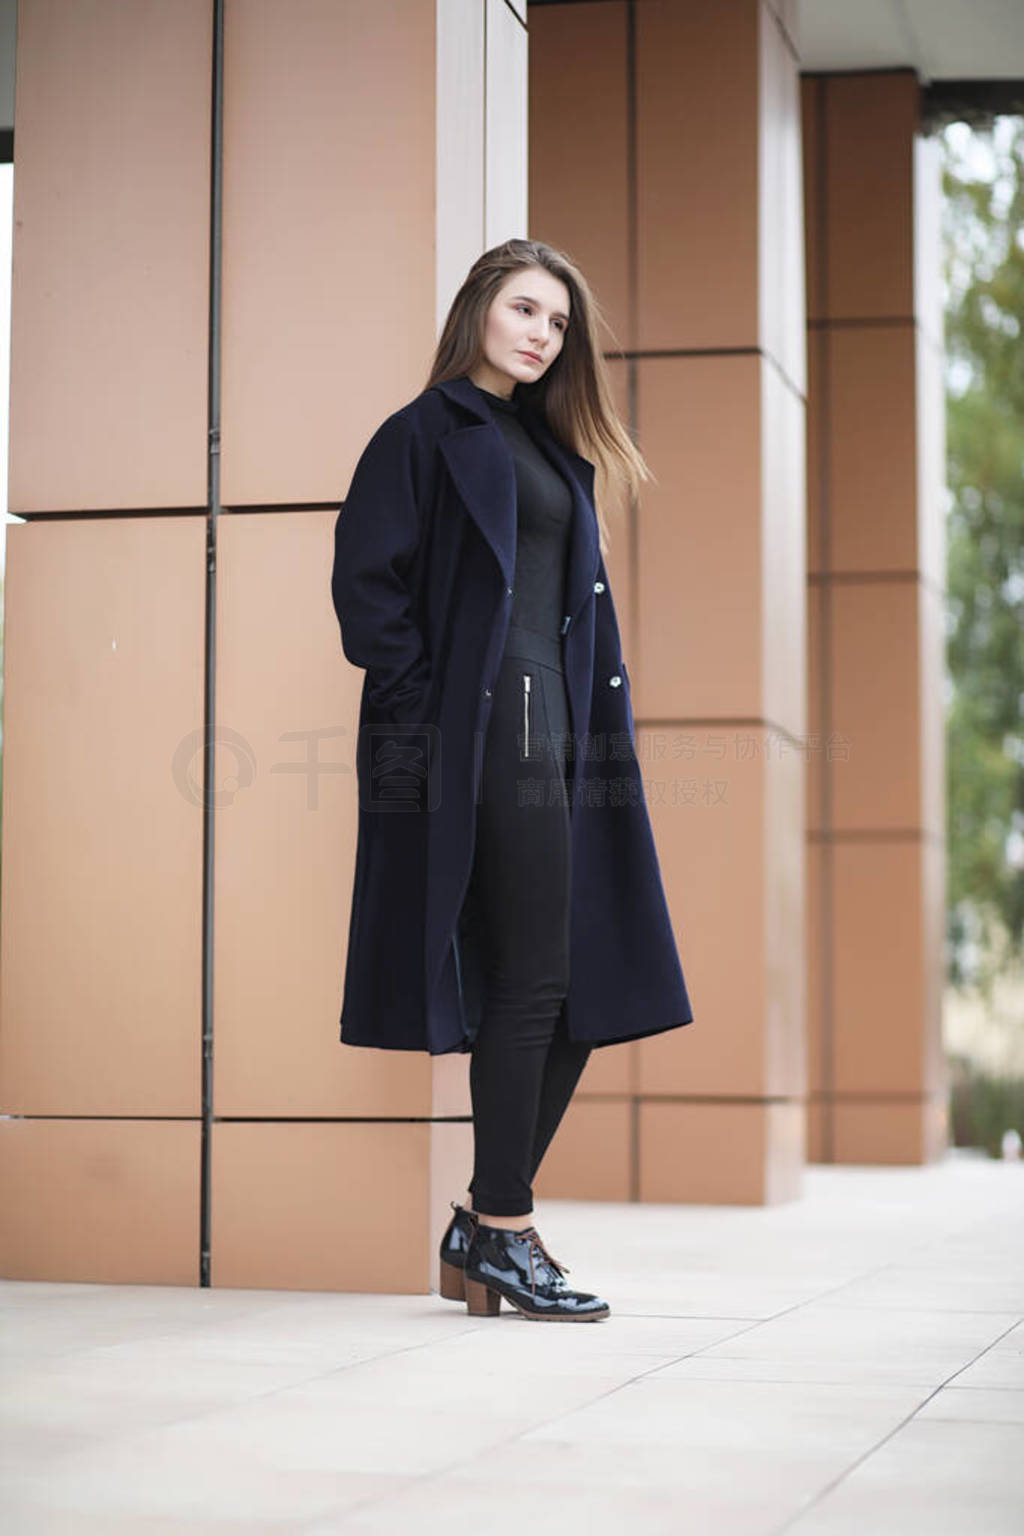 Beautiful girl in a coat in business downtown